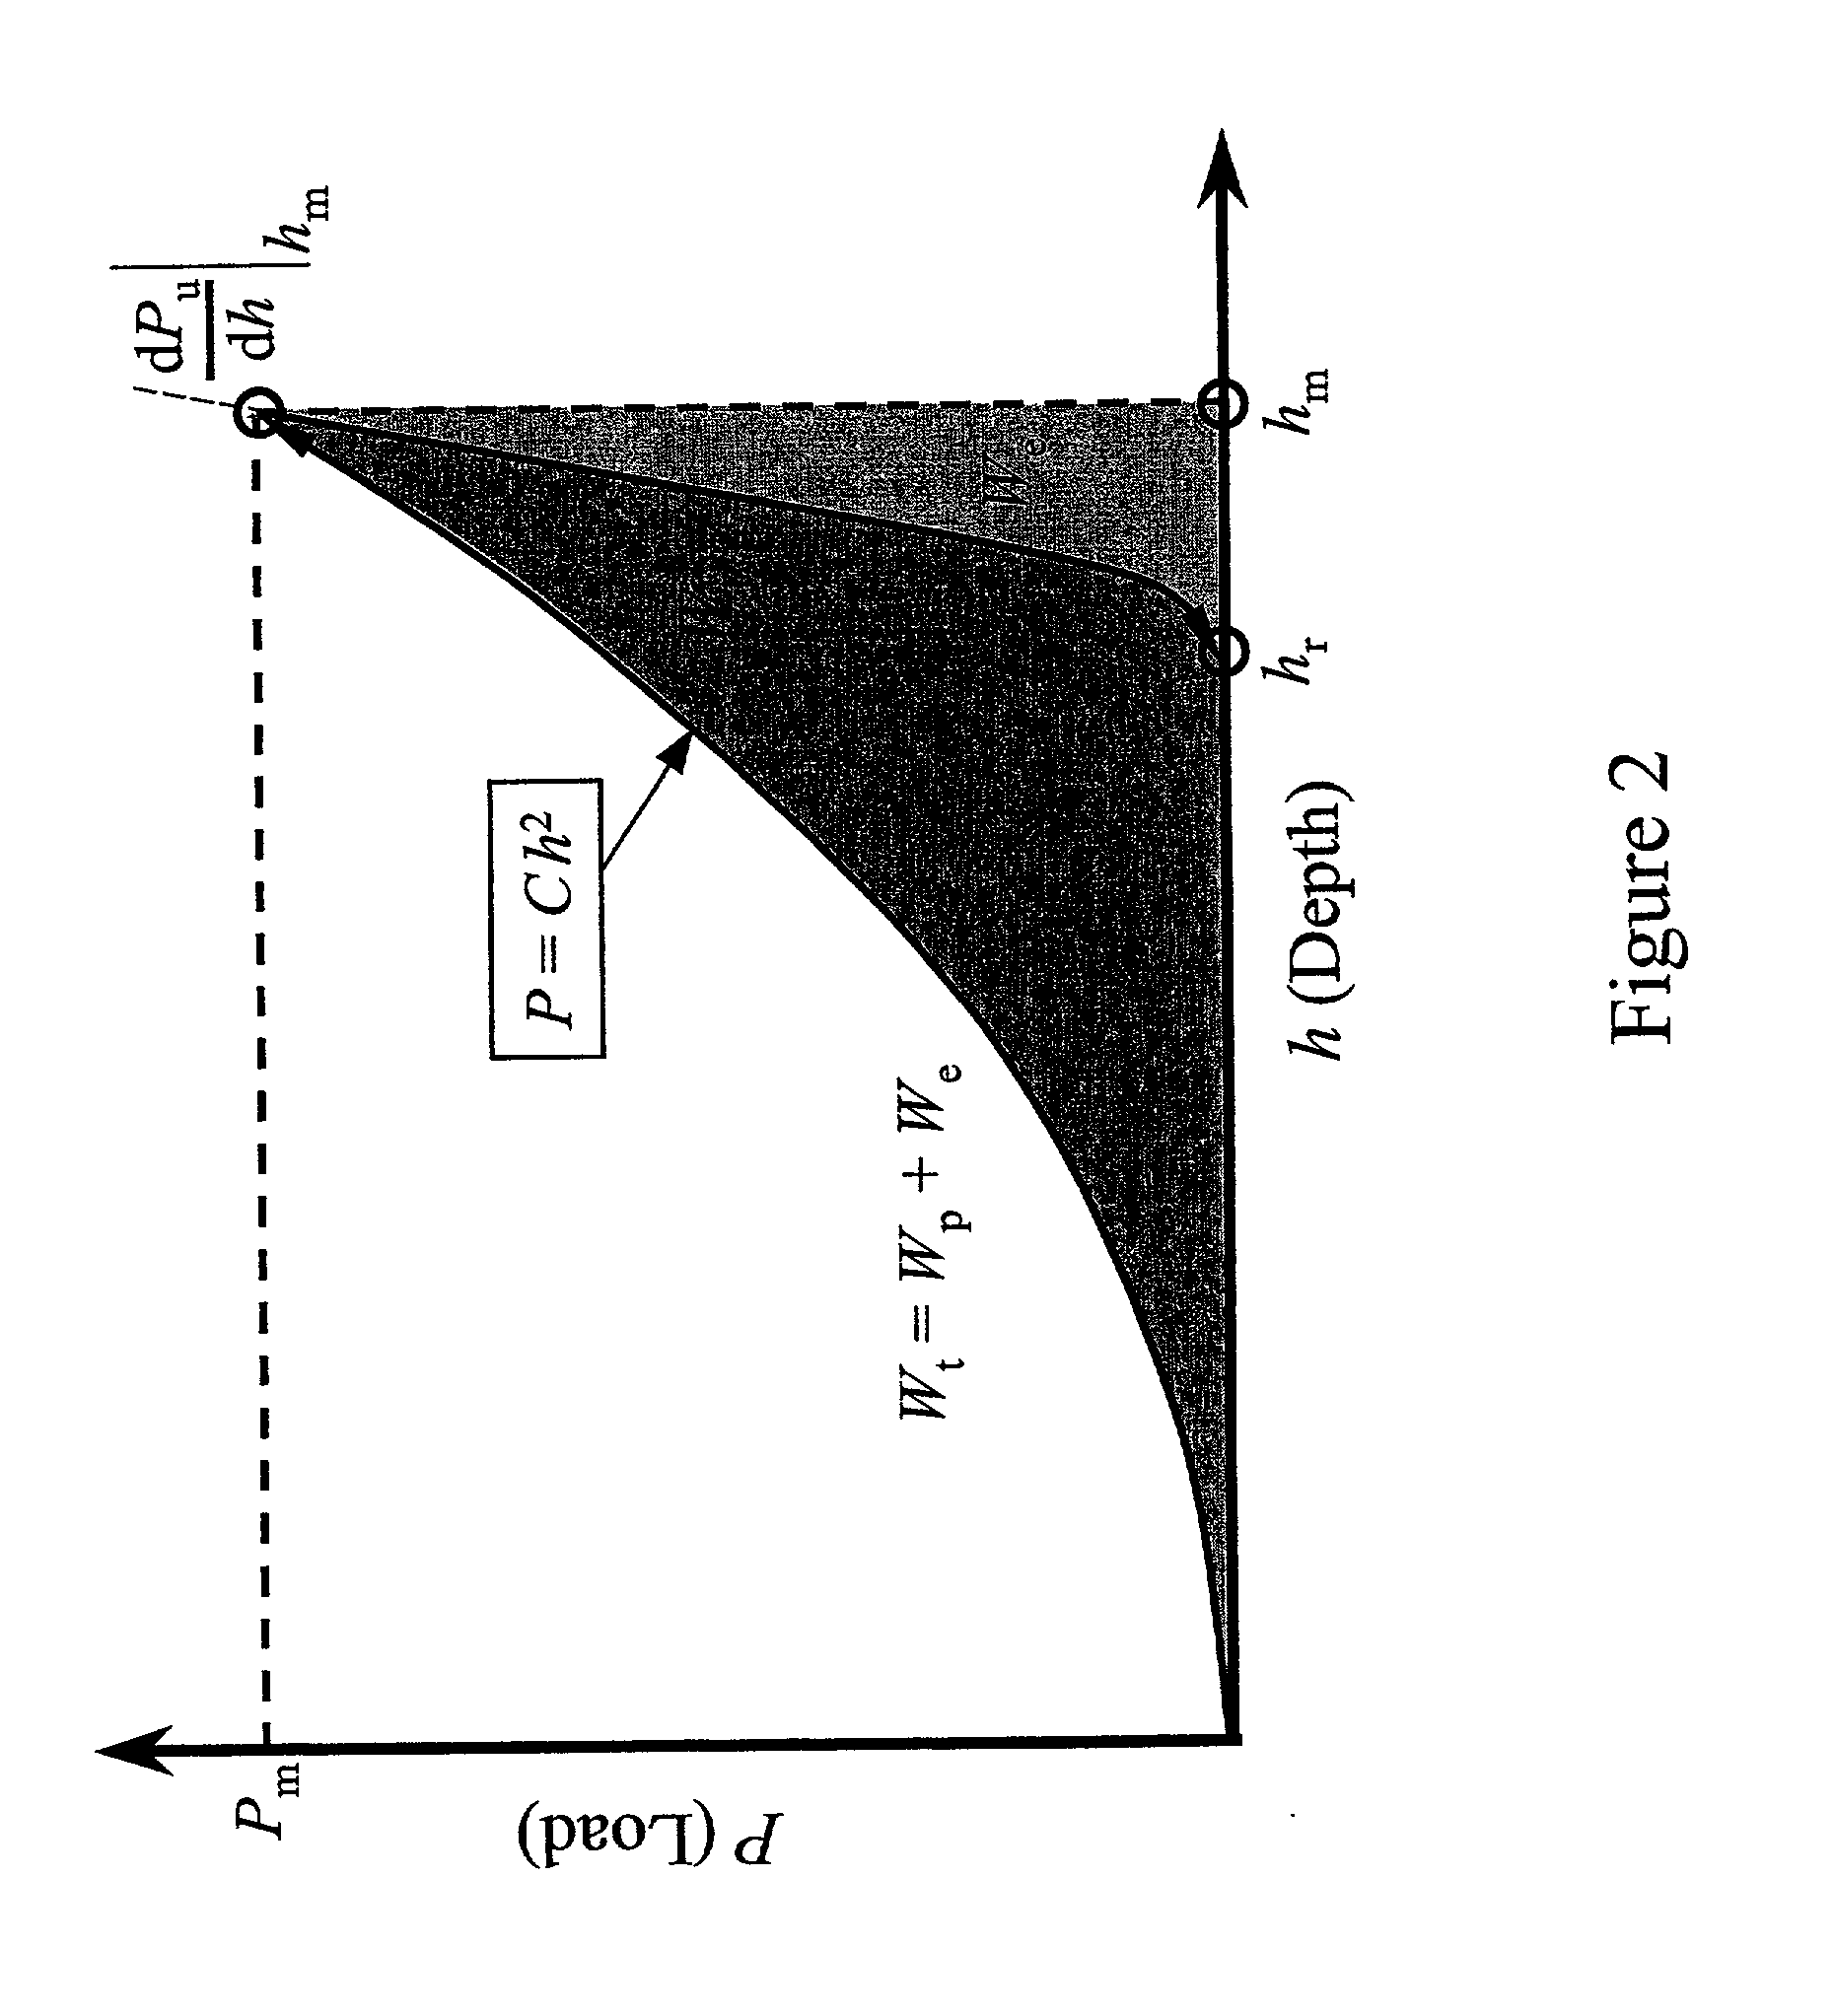 Systems and methods for estimation and analysis of mechanical property data associated with indentation testing